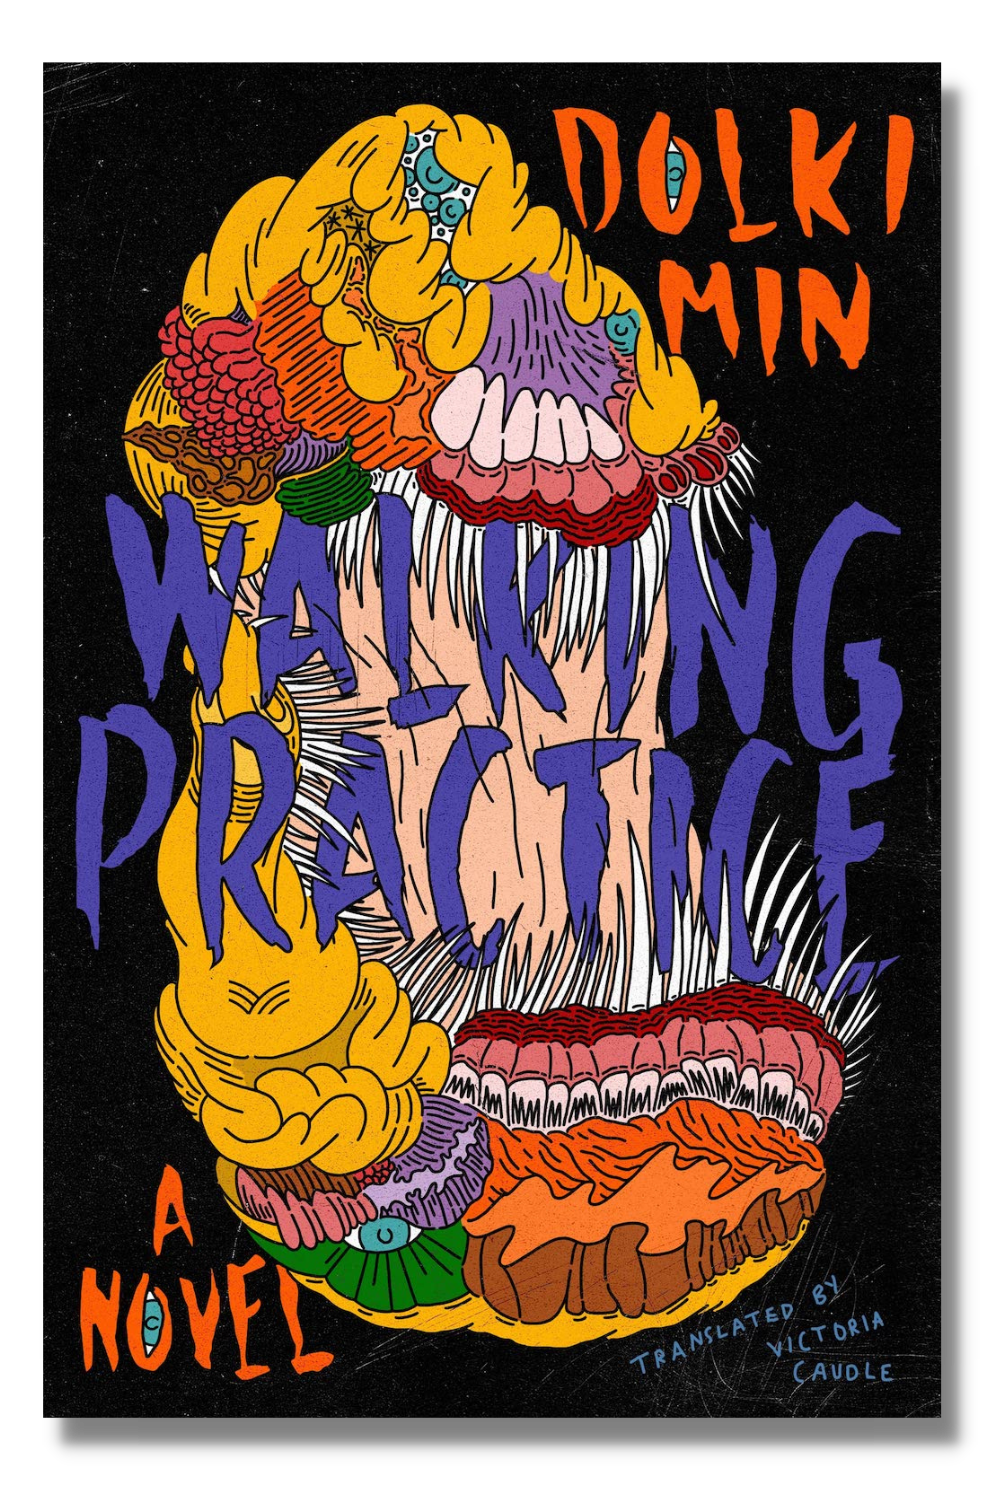 The cover of "Walking Practice"